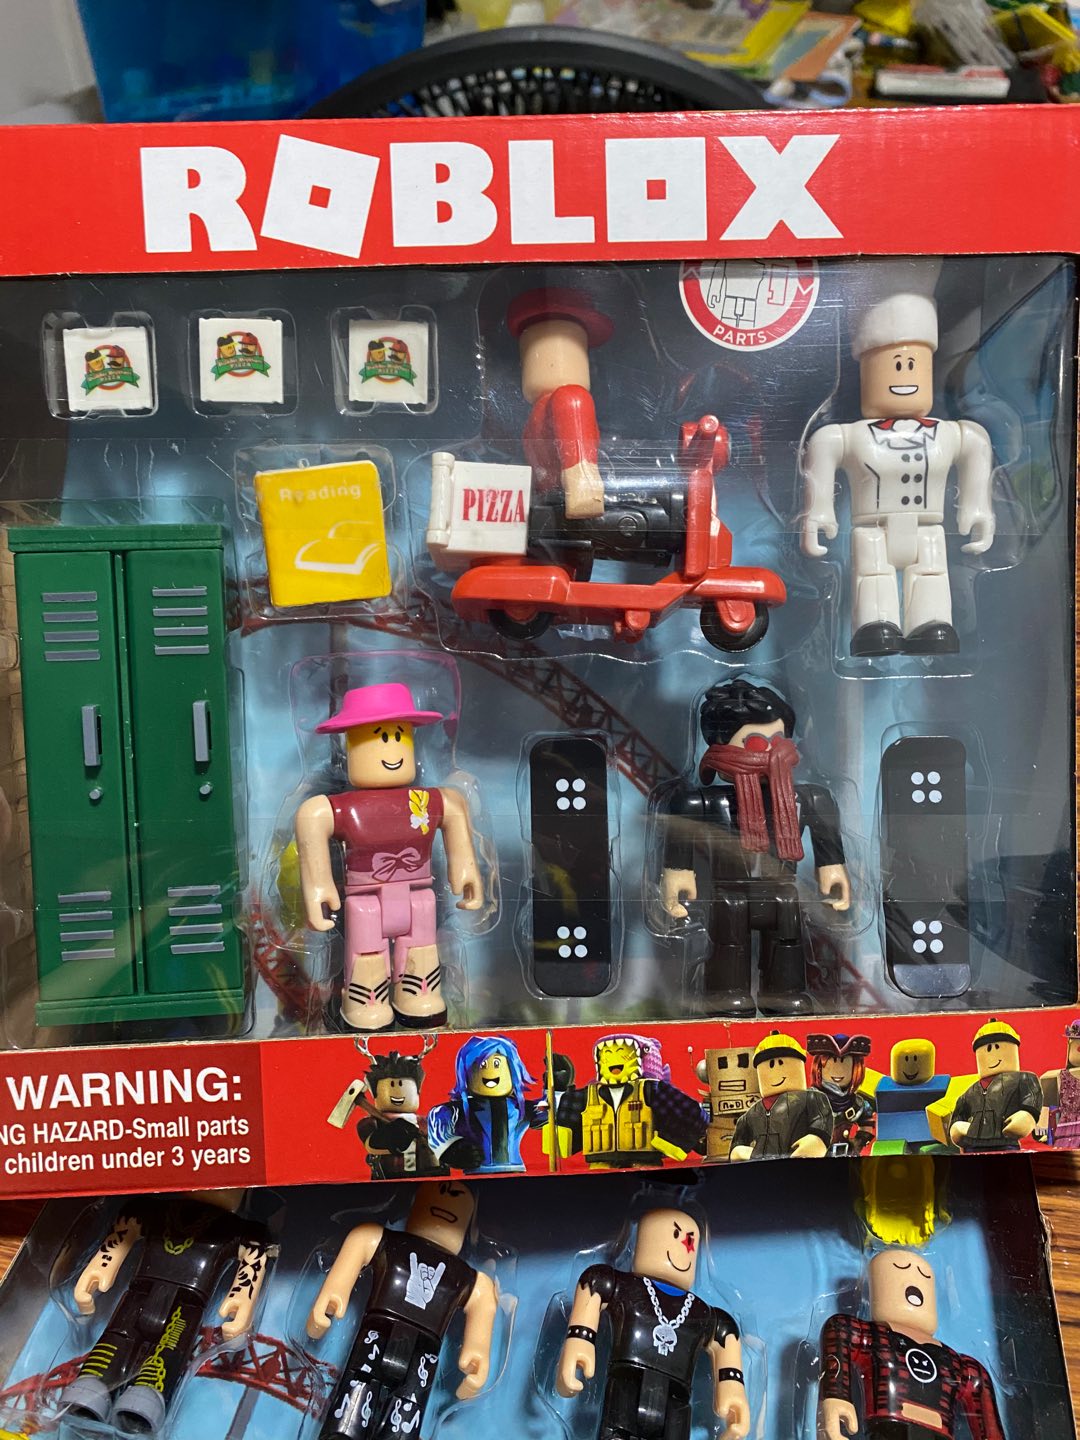 Latest Roblox Punk Rockers Toy Figure Set Shopee Philippines - roblox punk rockers toy code item unboxing toy review stop